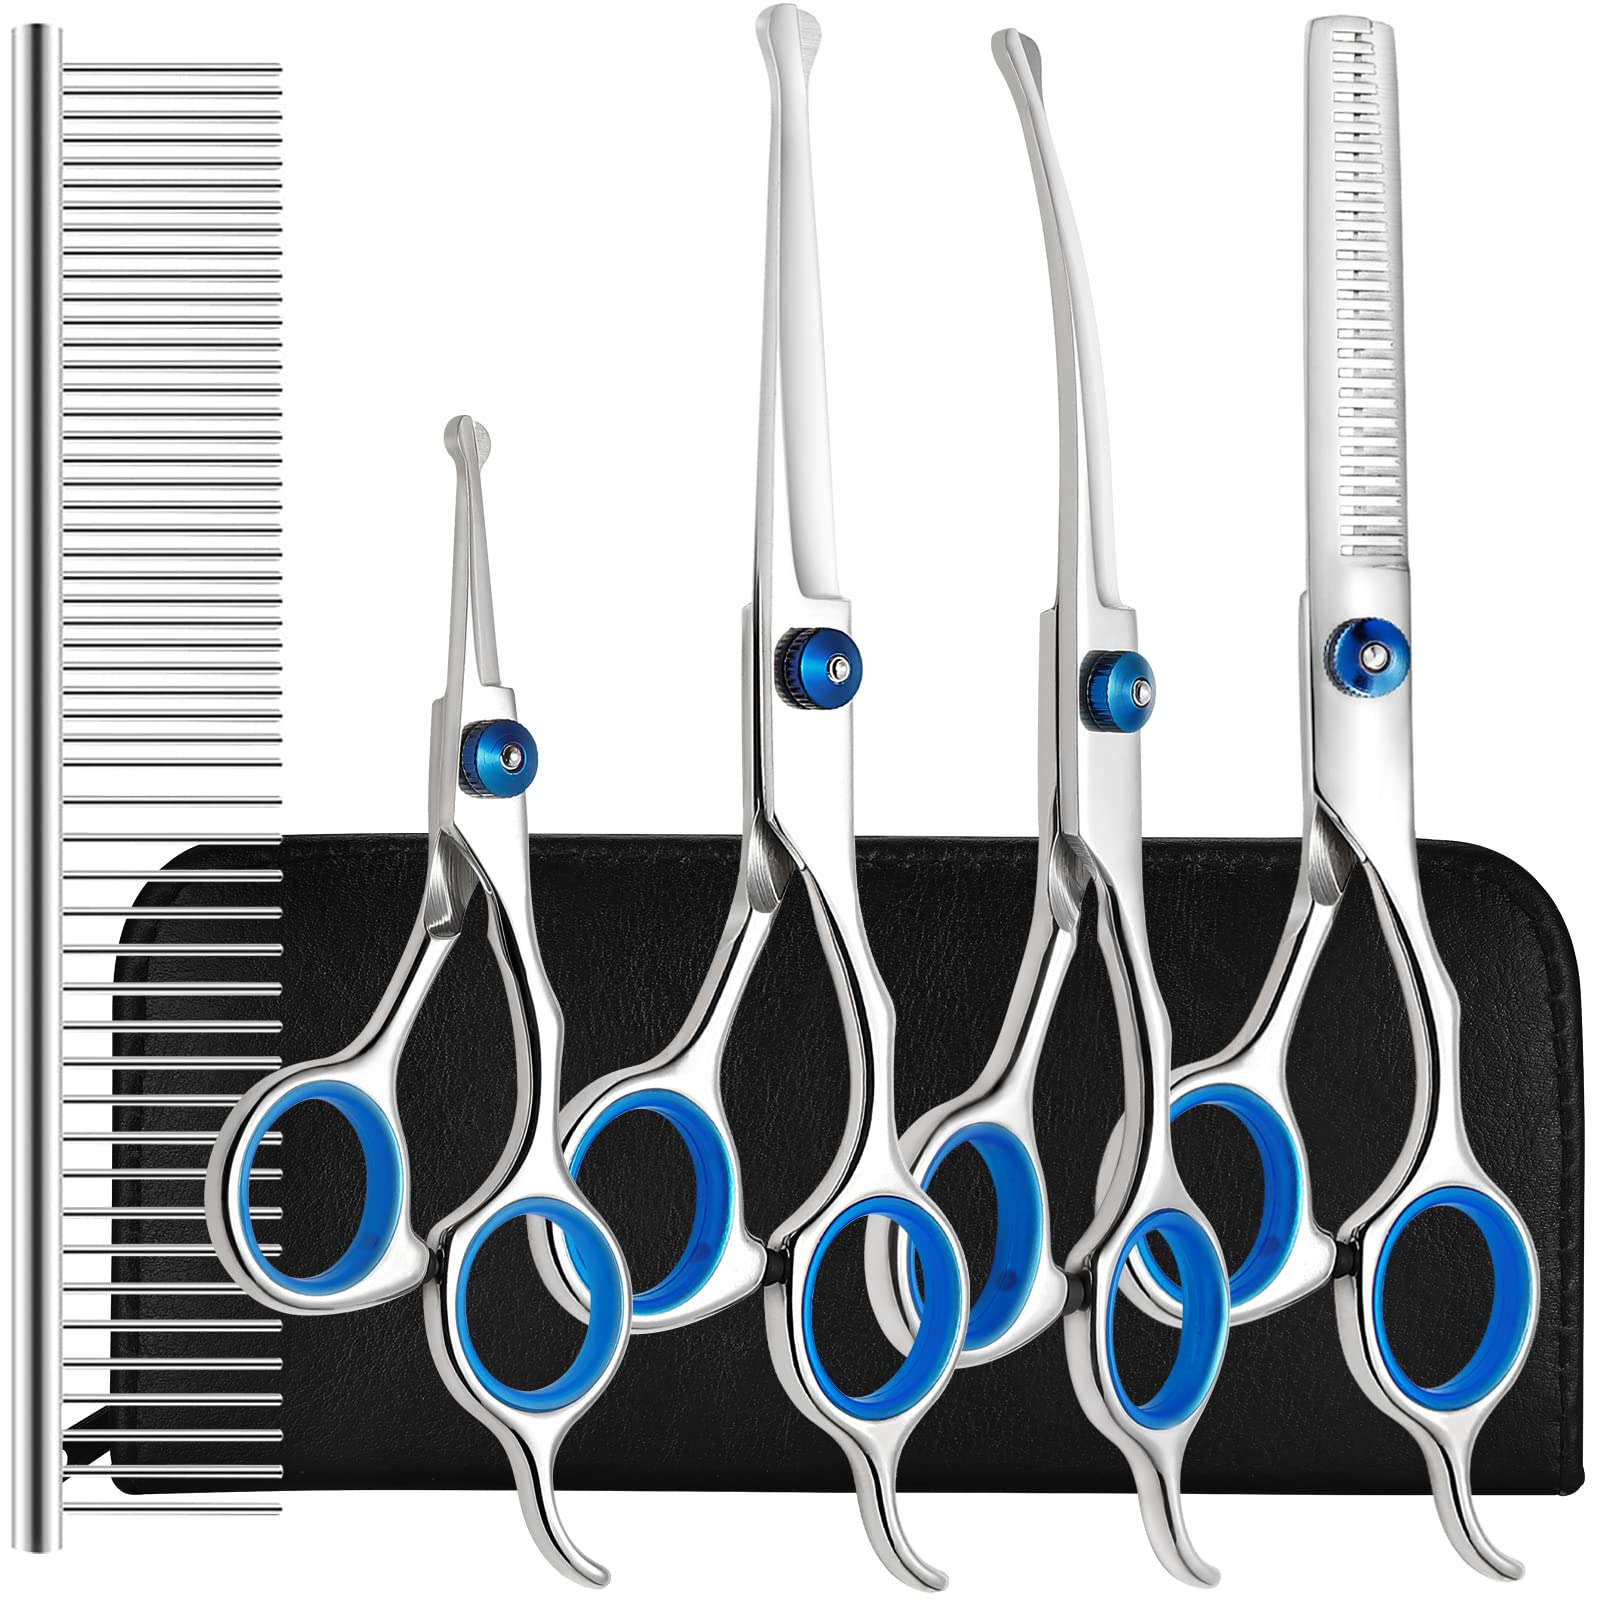 Dog Grooming Scissors Kit with Safety Round Tips, Liren Professional 6 in 1 Grooming Scissors for Dogs